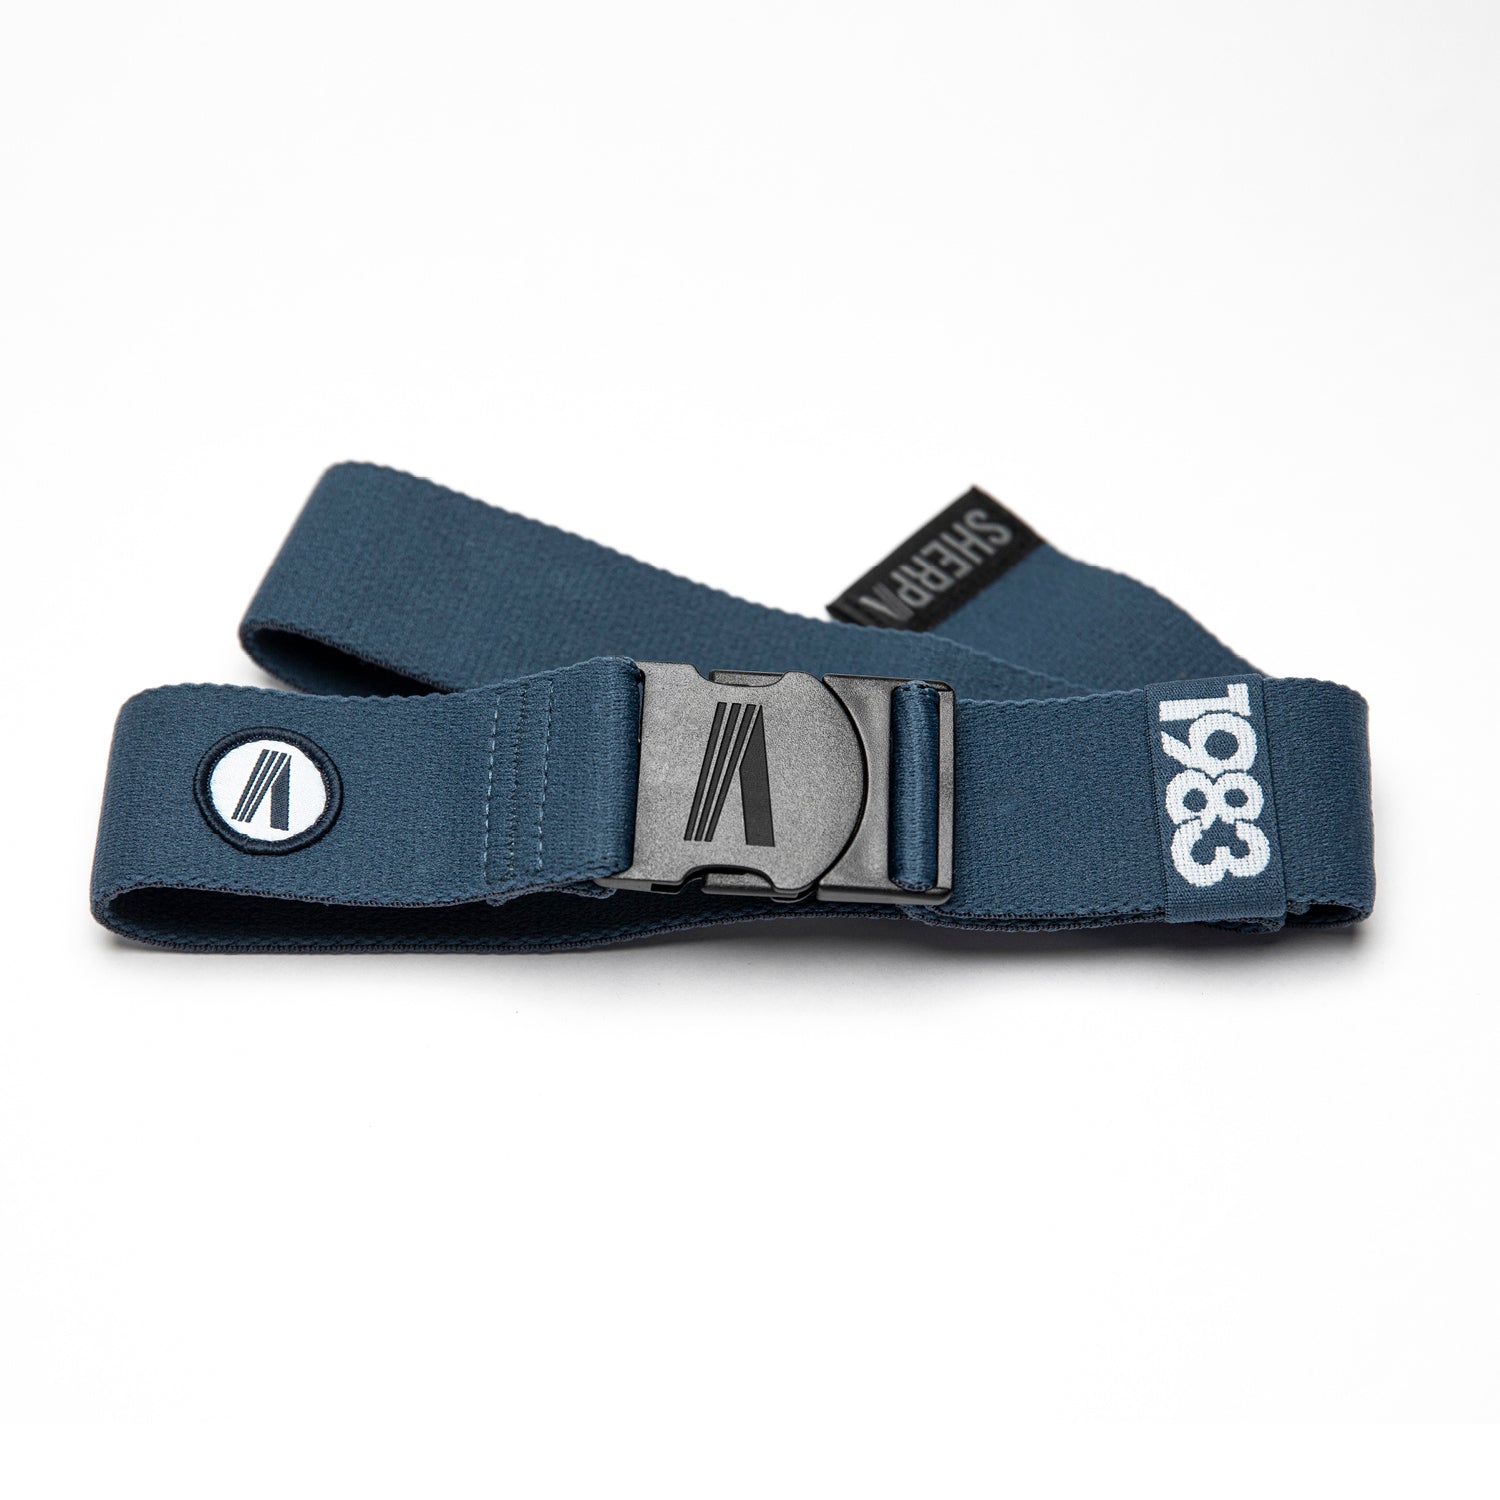 Sherpa Steel Blue Flexible Belt for the Active Lifestyle